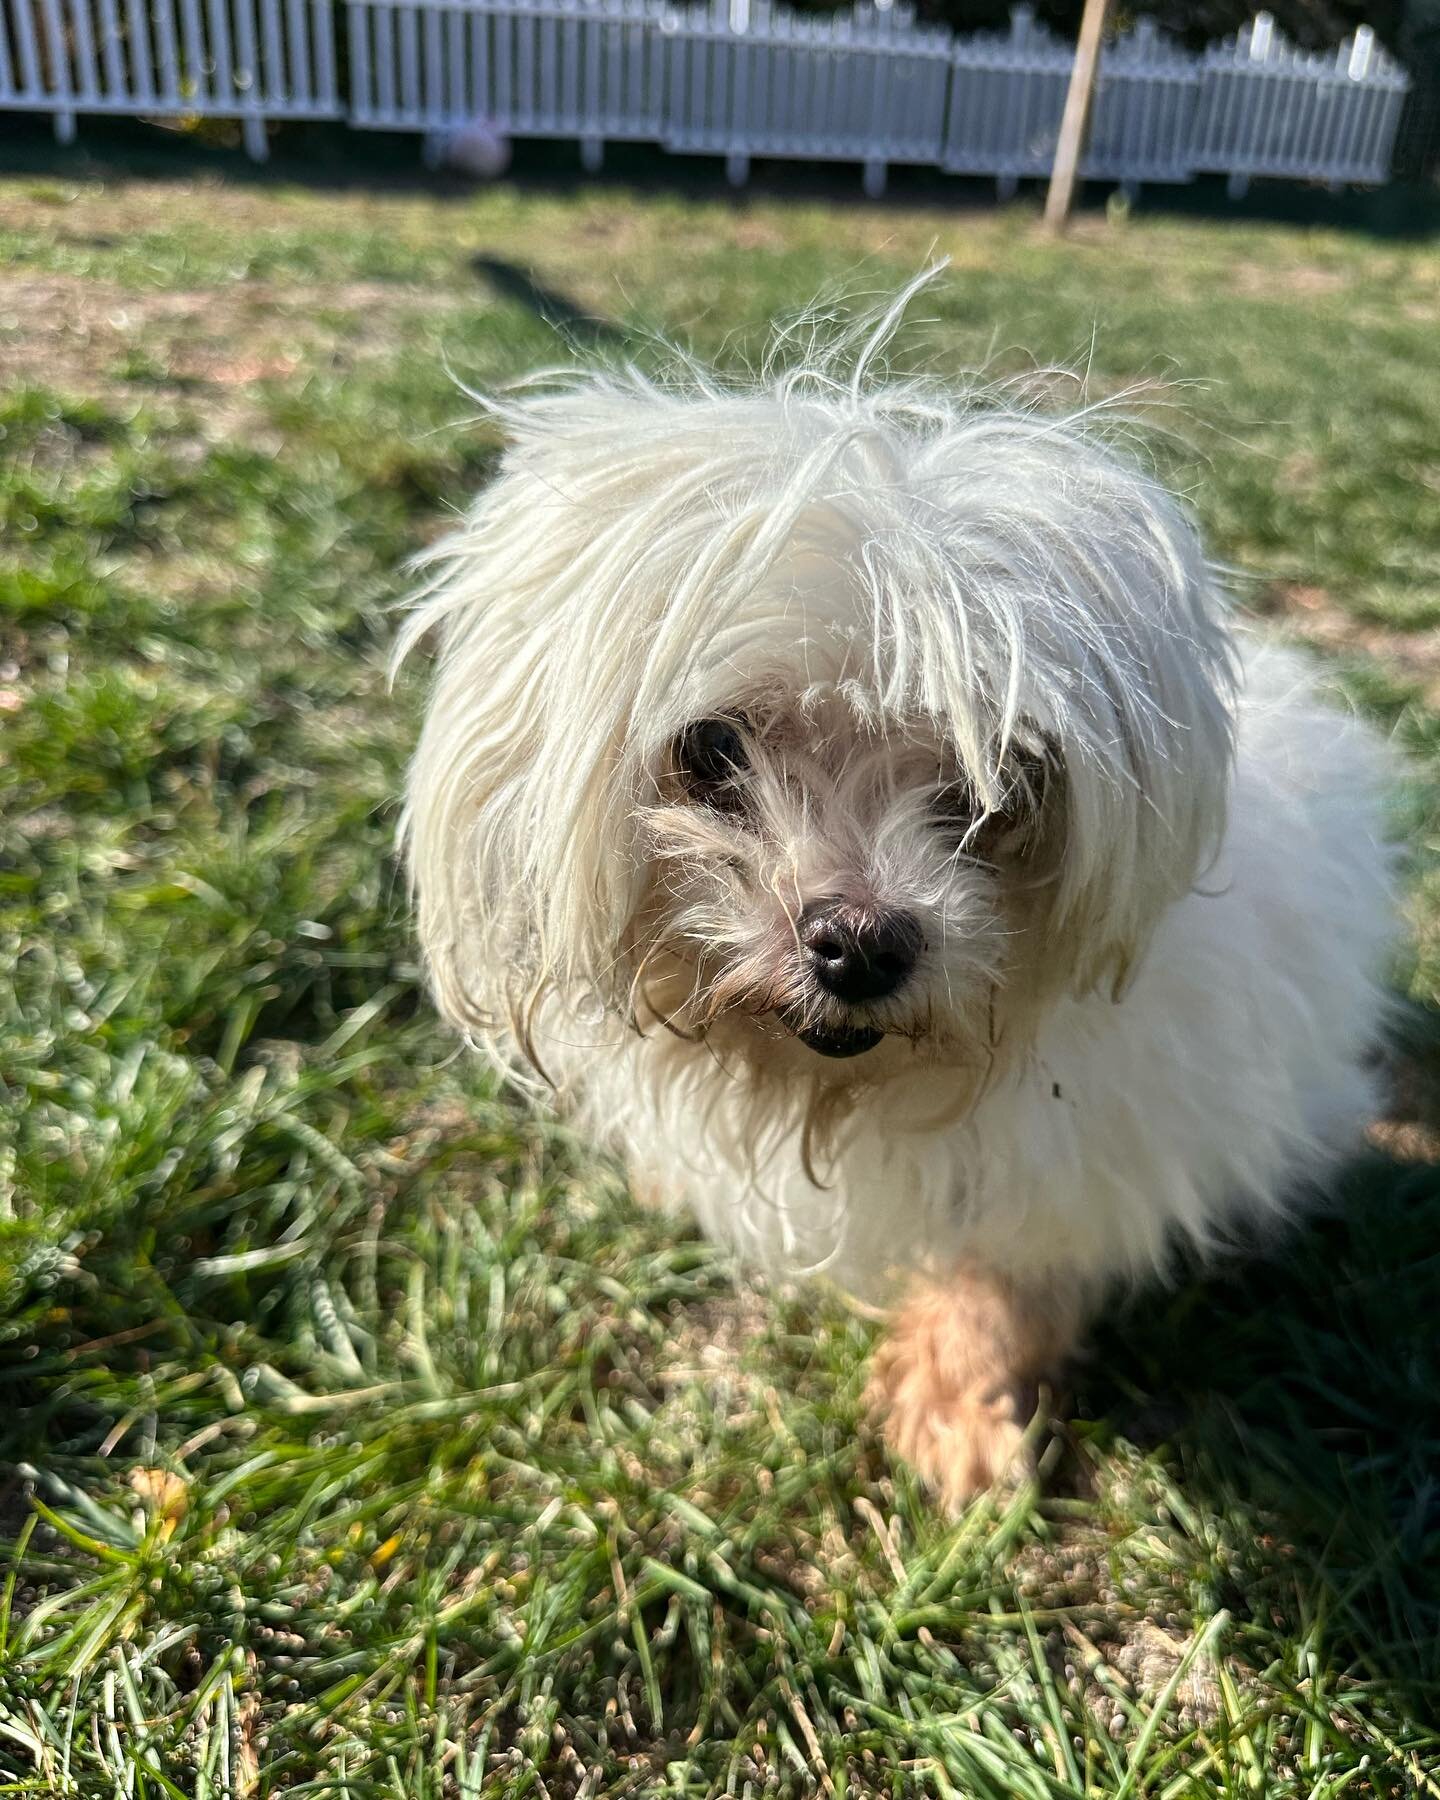 Meet the newest member of @goldenbarkfoundation, Winnie! 

She&rsquo;s a tiny shy gal we picked up from the shelter yesterday. Her coat was fully matted, her eye is covered in goo, and her back leg doesn&rsquo;t work. 

Her history is a little sad. H